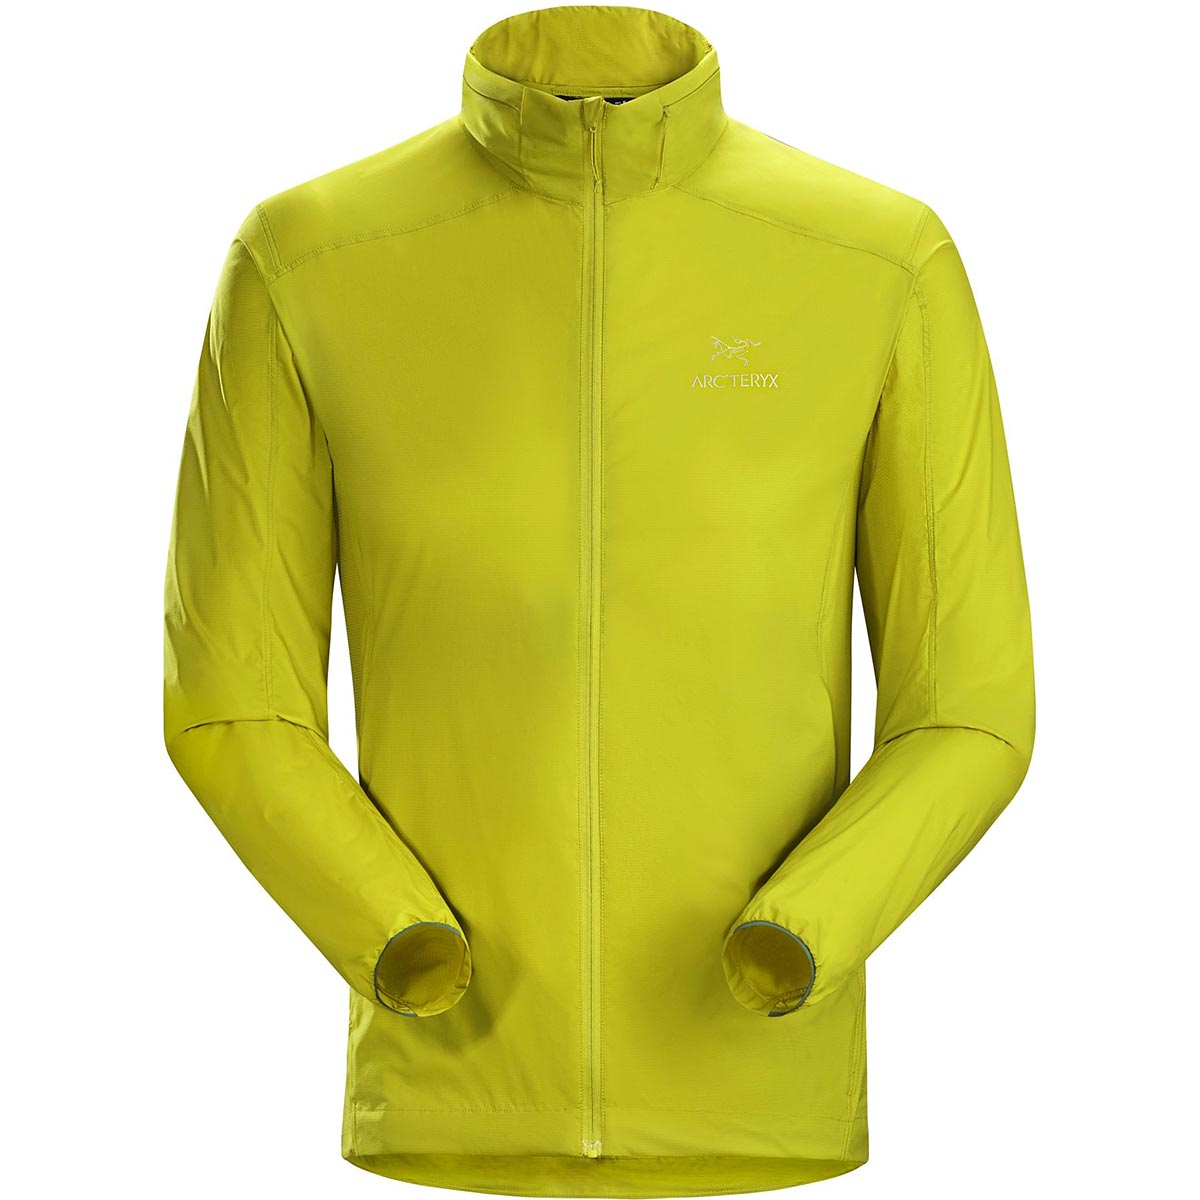 Arc'teryx Nodin Jacket, men's, discontinued Fall 2018 colors (free ground  shipping) :: Light/Athletic Jackets :: Jackets :: Clothing :: Moontrail